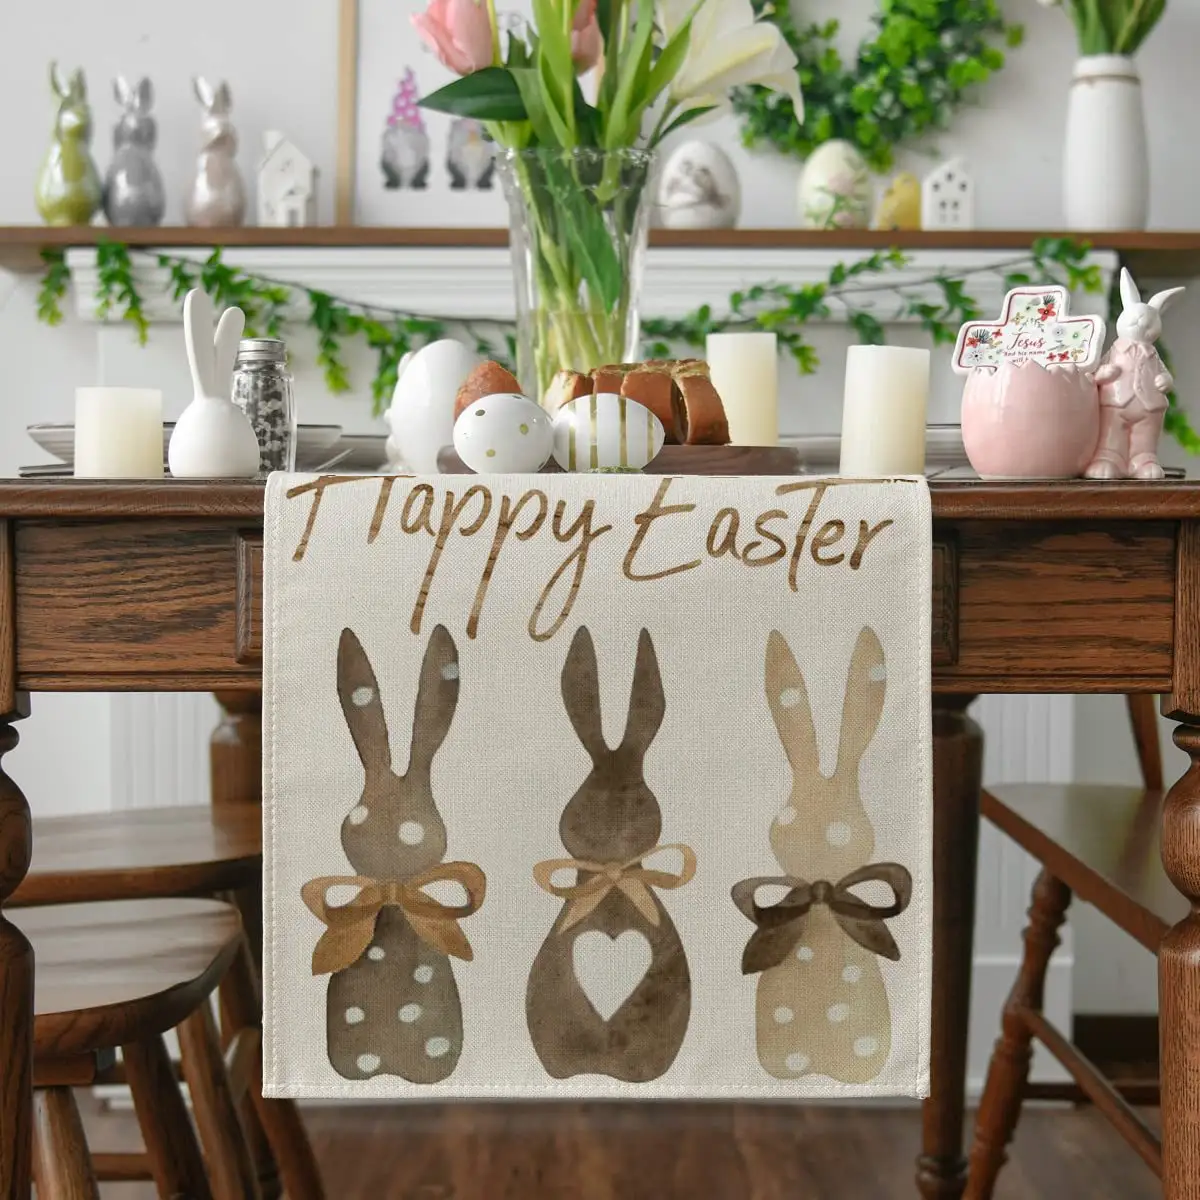 Happy Easter Table Cover Protector Bulk Tablecloths Rabbit Printed Table Runner Easter Tablecloths